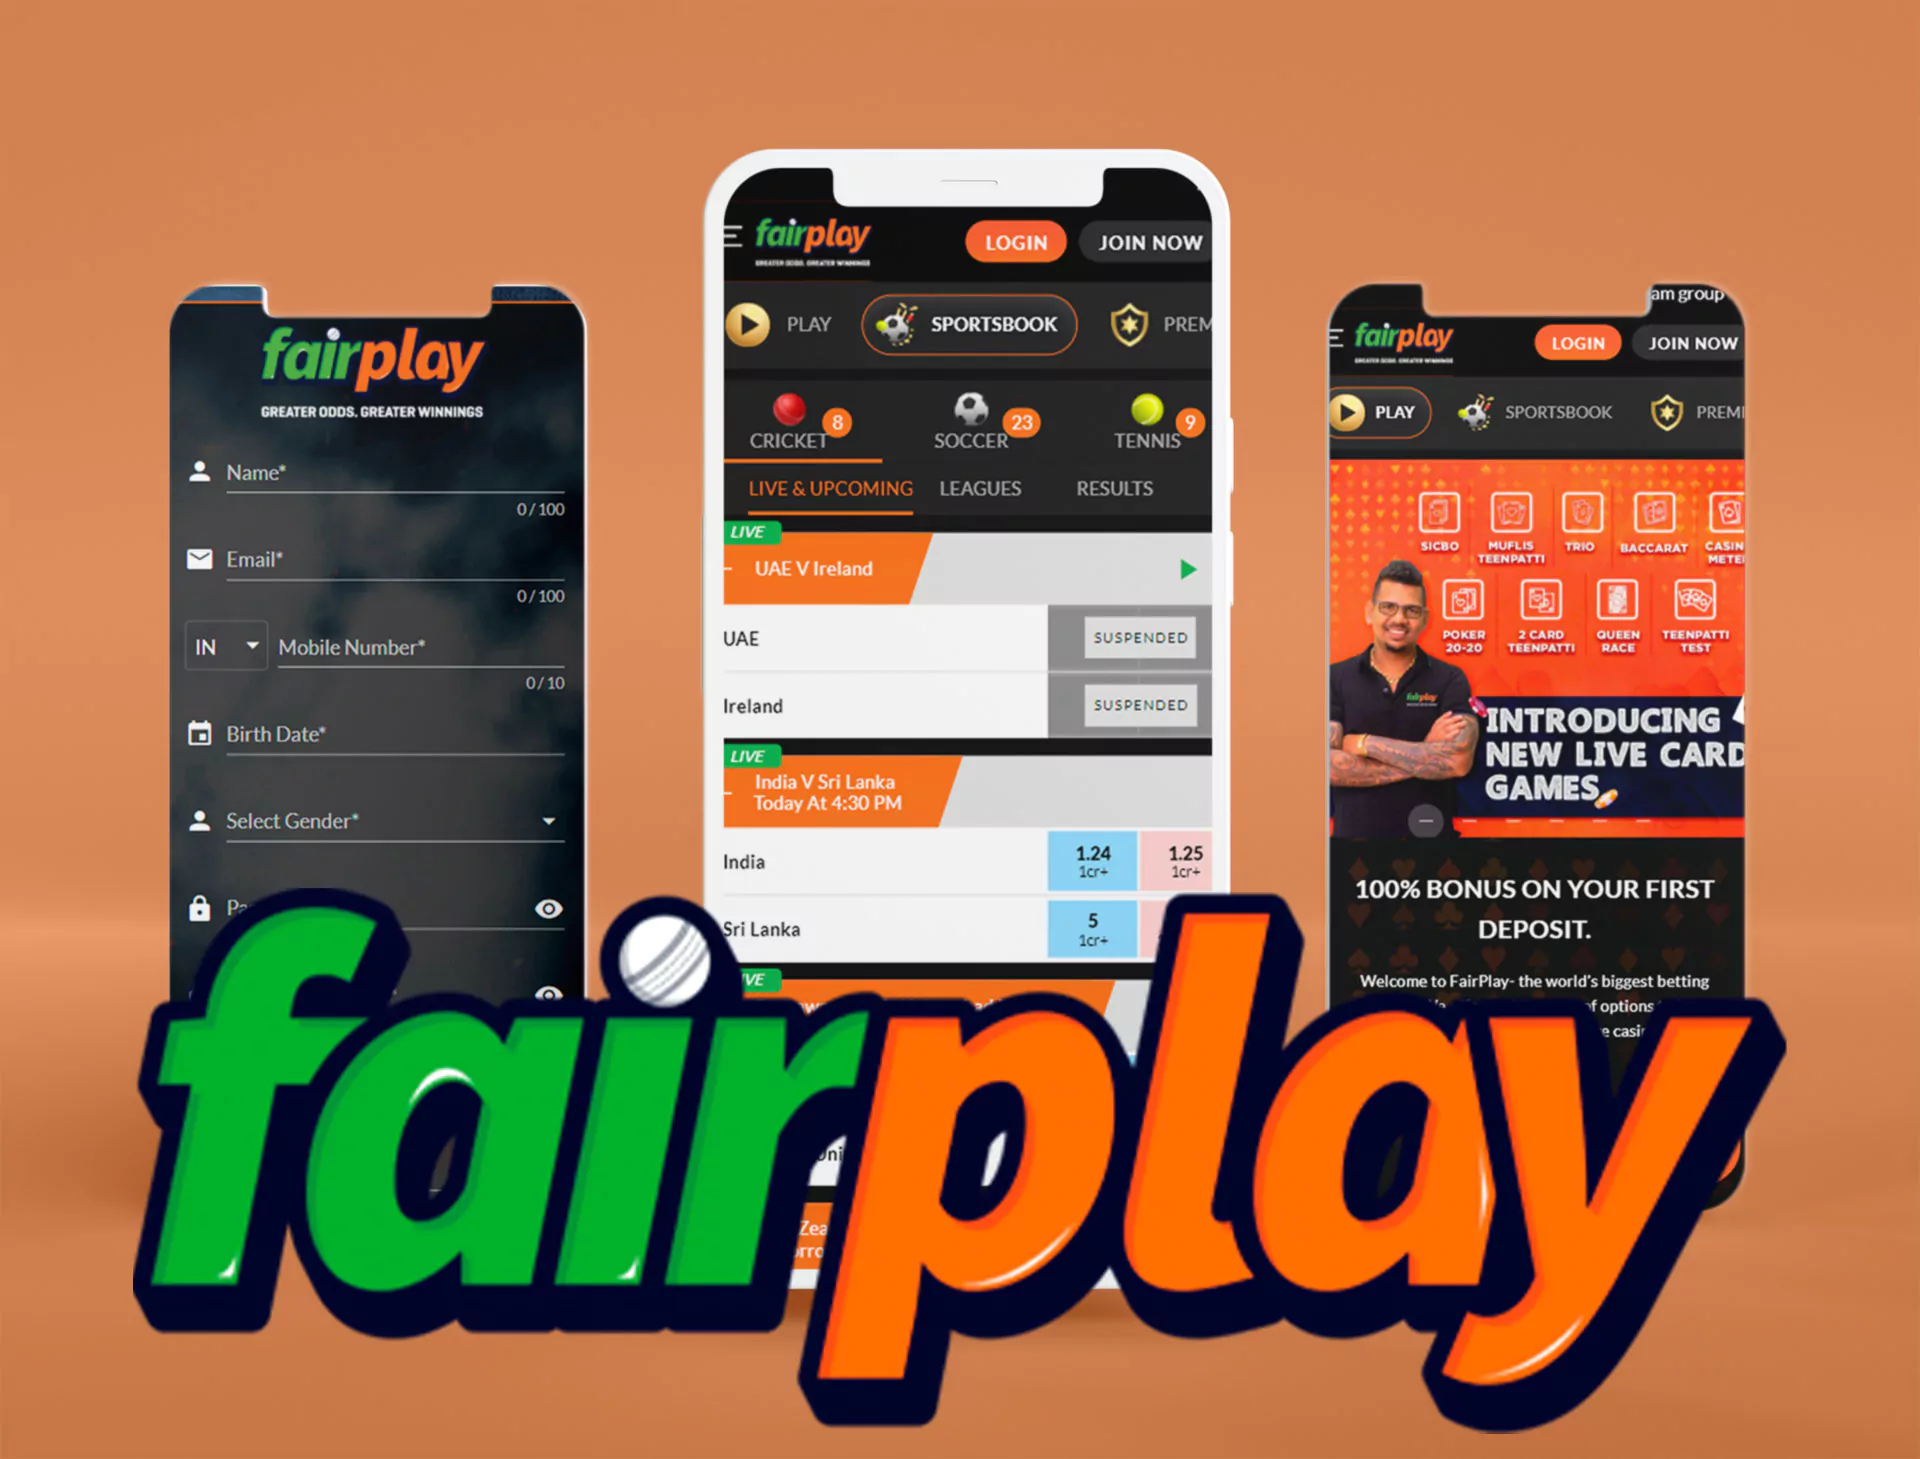 Follow these recommendations for comfortable use of the Fairplay's app.